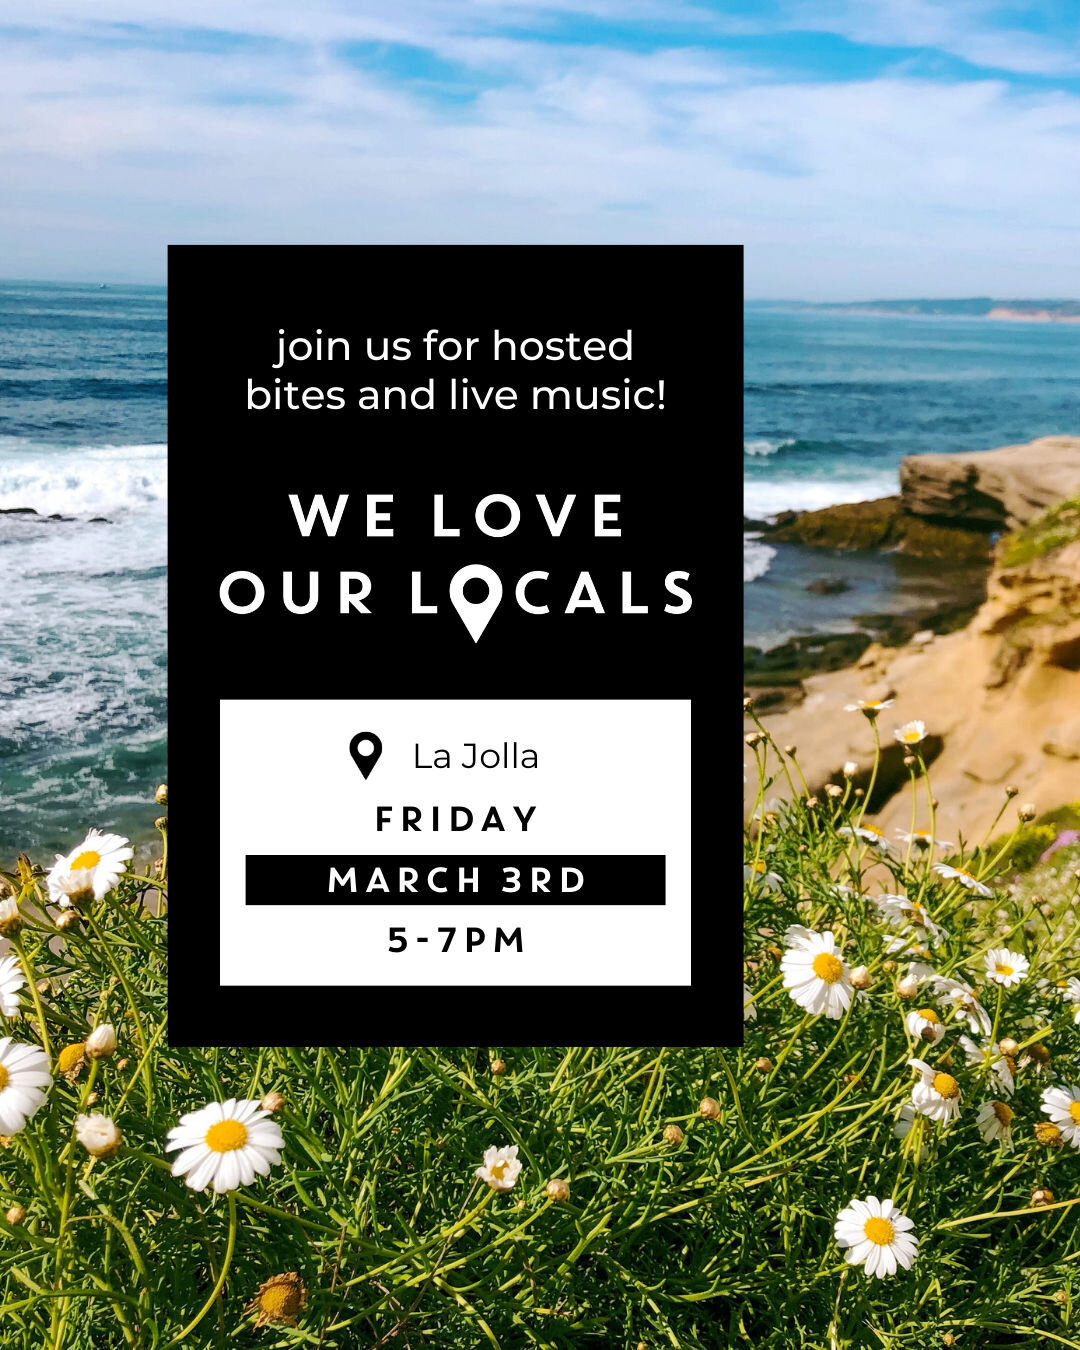 Next Friday night is Locals Night in La Jolla!

Come enjoy live music and hosted graze boards and bites (while they last!)..

Don't forget, Social Club members will receive a complimentary glass of Social Club Ros&eacute;!

DETAILS:
When: March 3rd, 